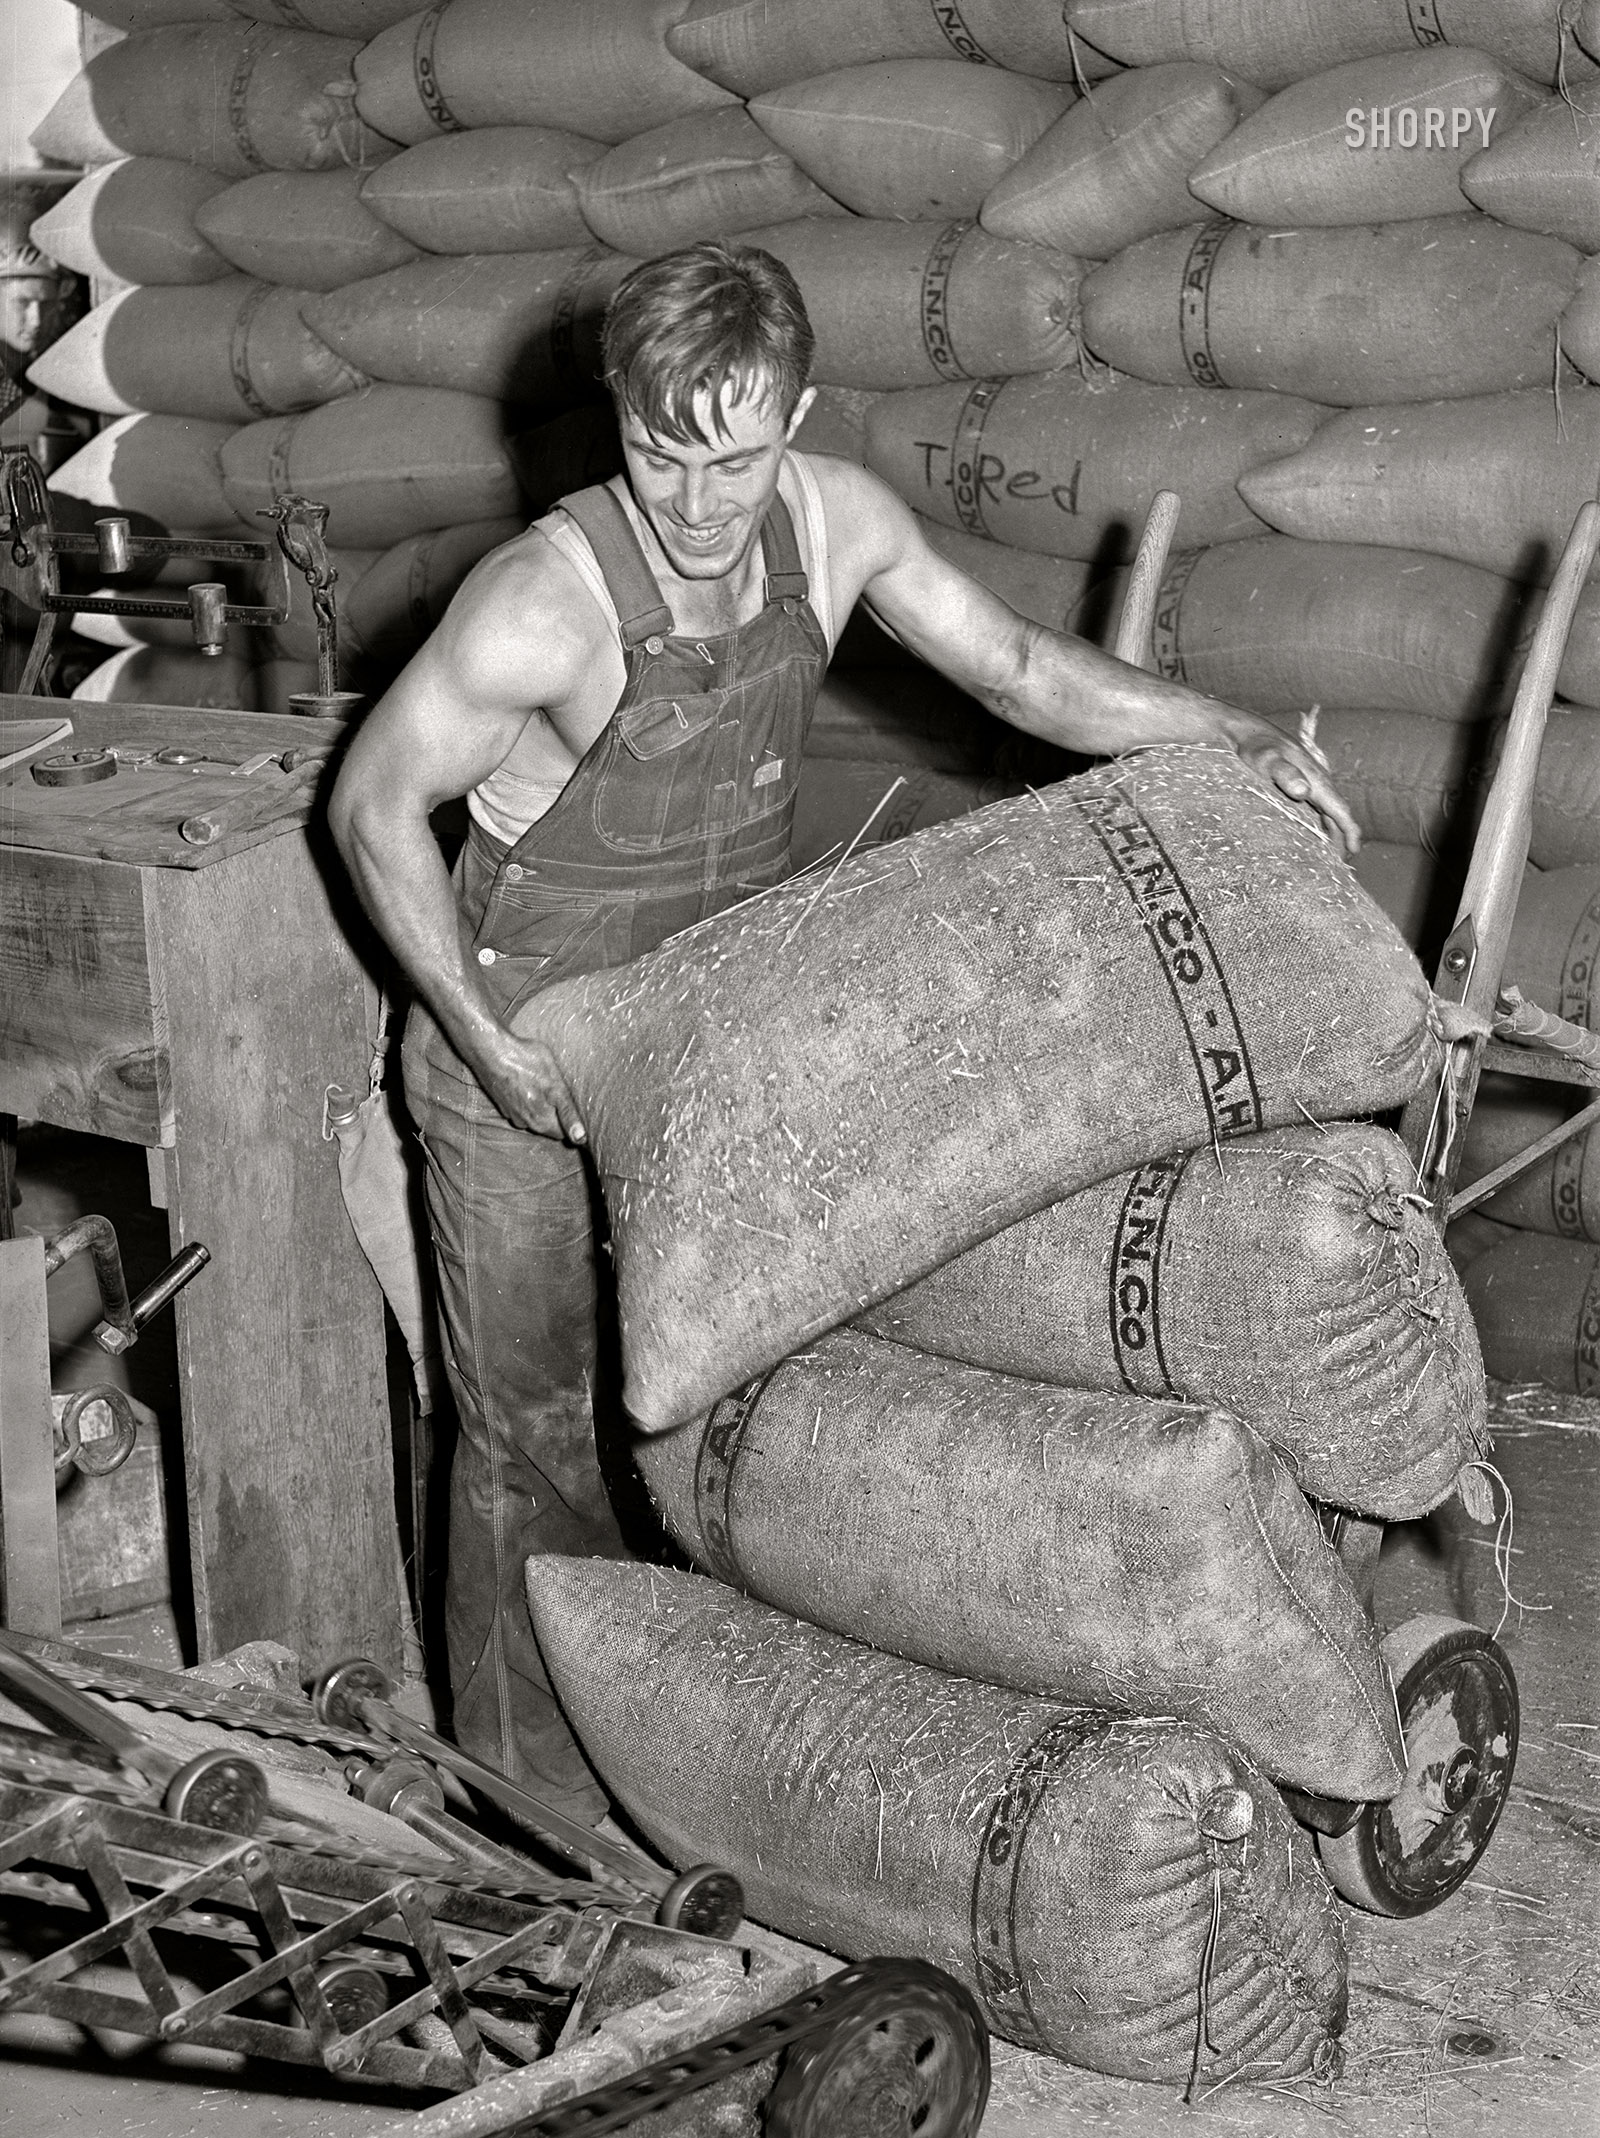 July 1941. "Sacked wheat being stored in warehouse. Touchet, Walla Walla County, Washington." Photo by Russell Lee for the Farm Security Administration. View full size.